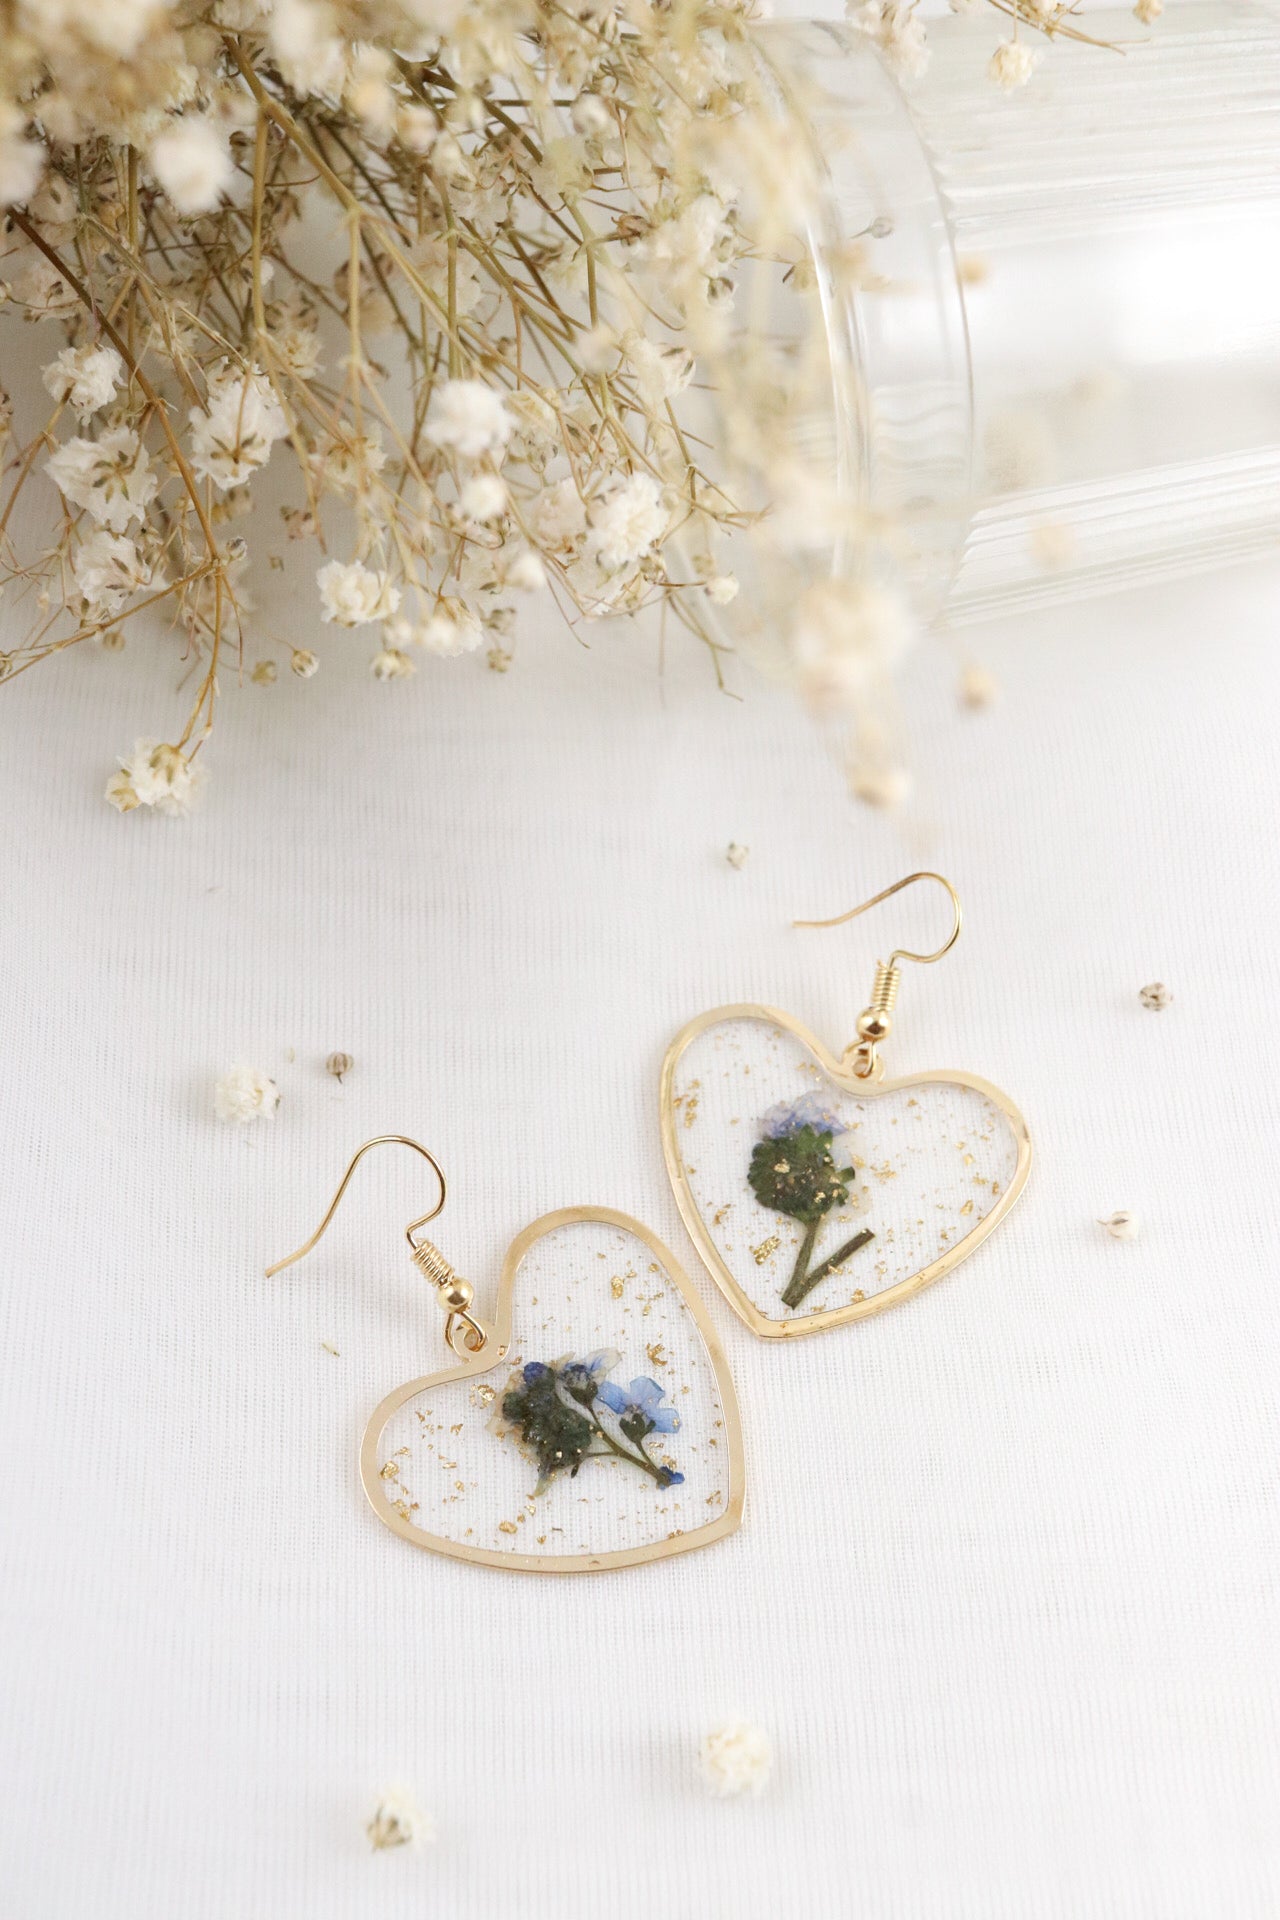 Forget Me Not Wildflower Heart Resin Earrings, Pressed Dried Natural Flowers, Botanical Nature Jewelry Gift For Her